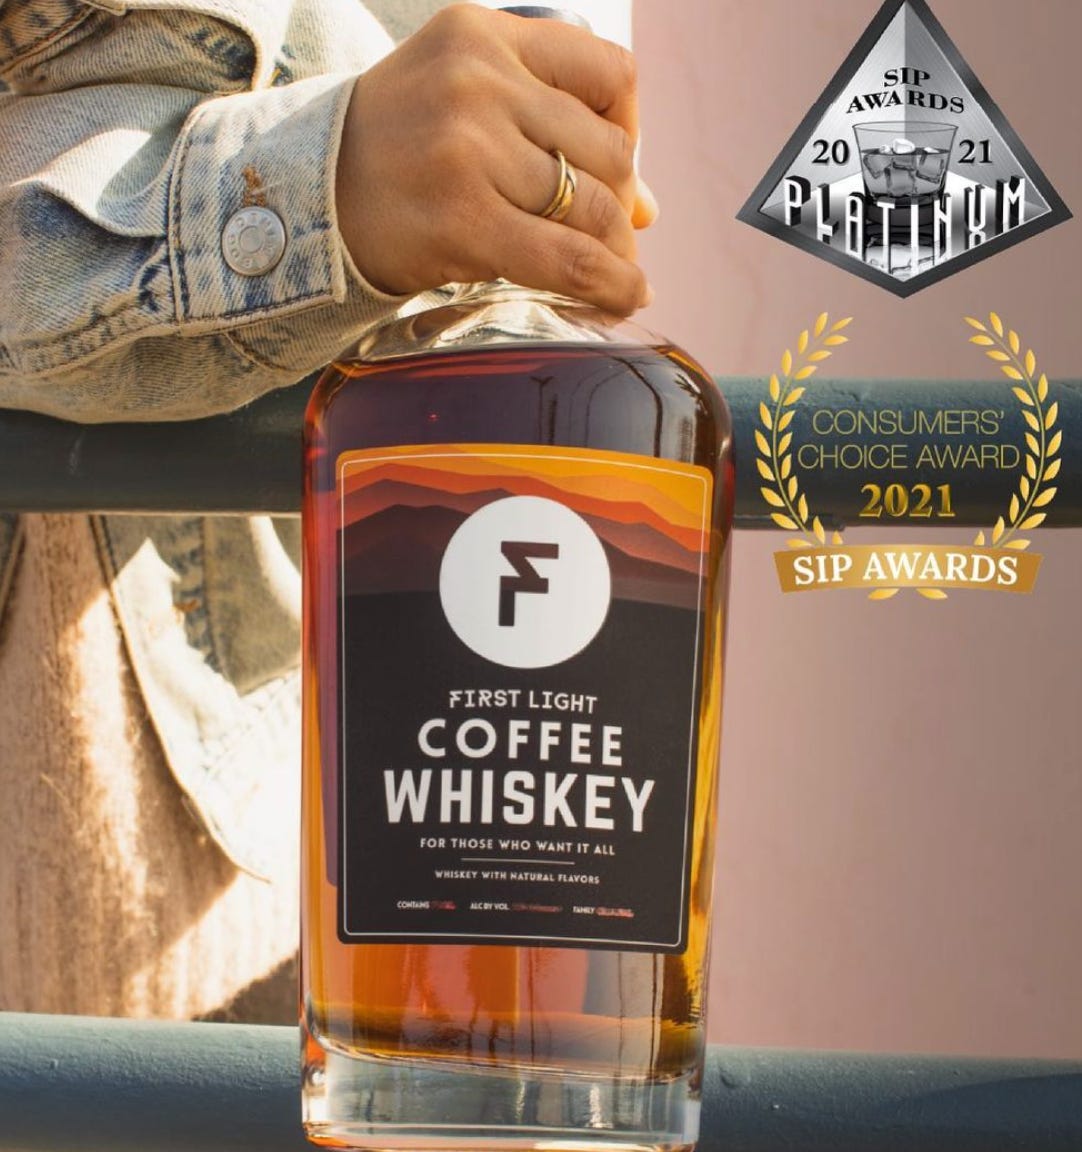 A bottle of First Light Coffee Whiskey held up close to the camera by a man's hand with a gold ring on the ring finger, and a stone-washed jean jacket visible to just past the cuff.